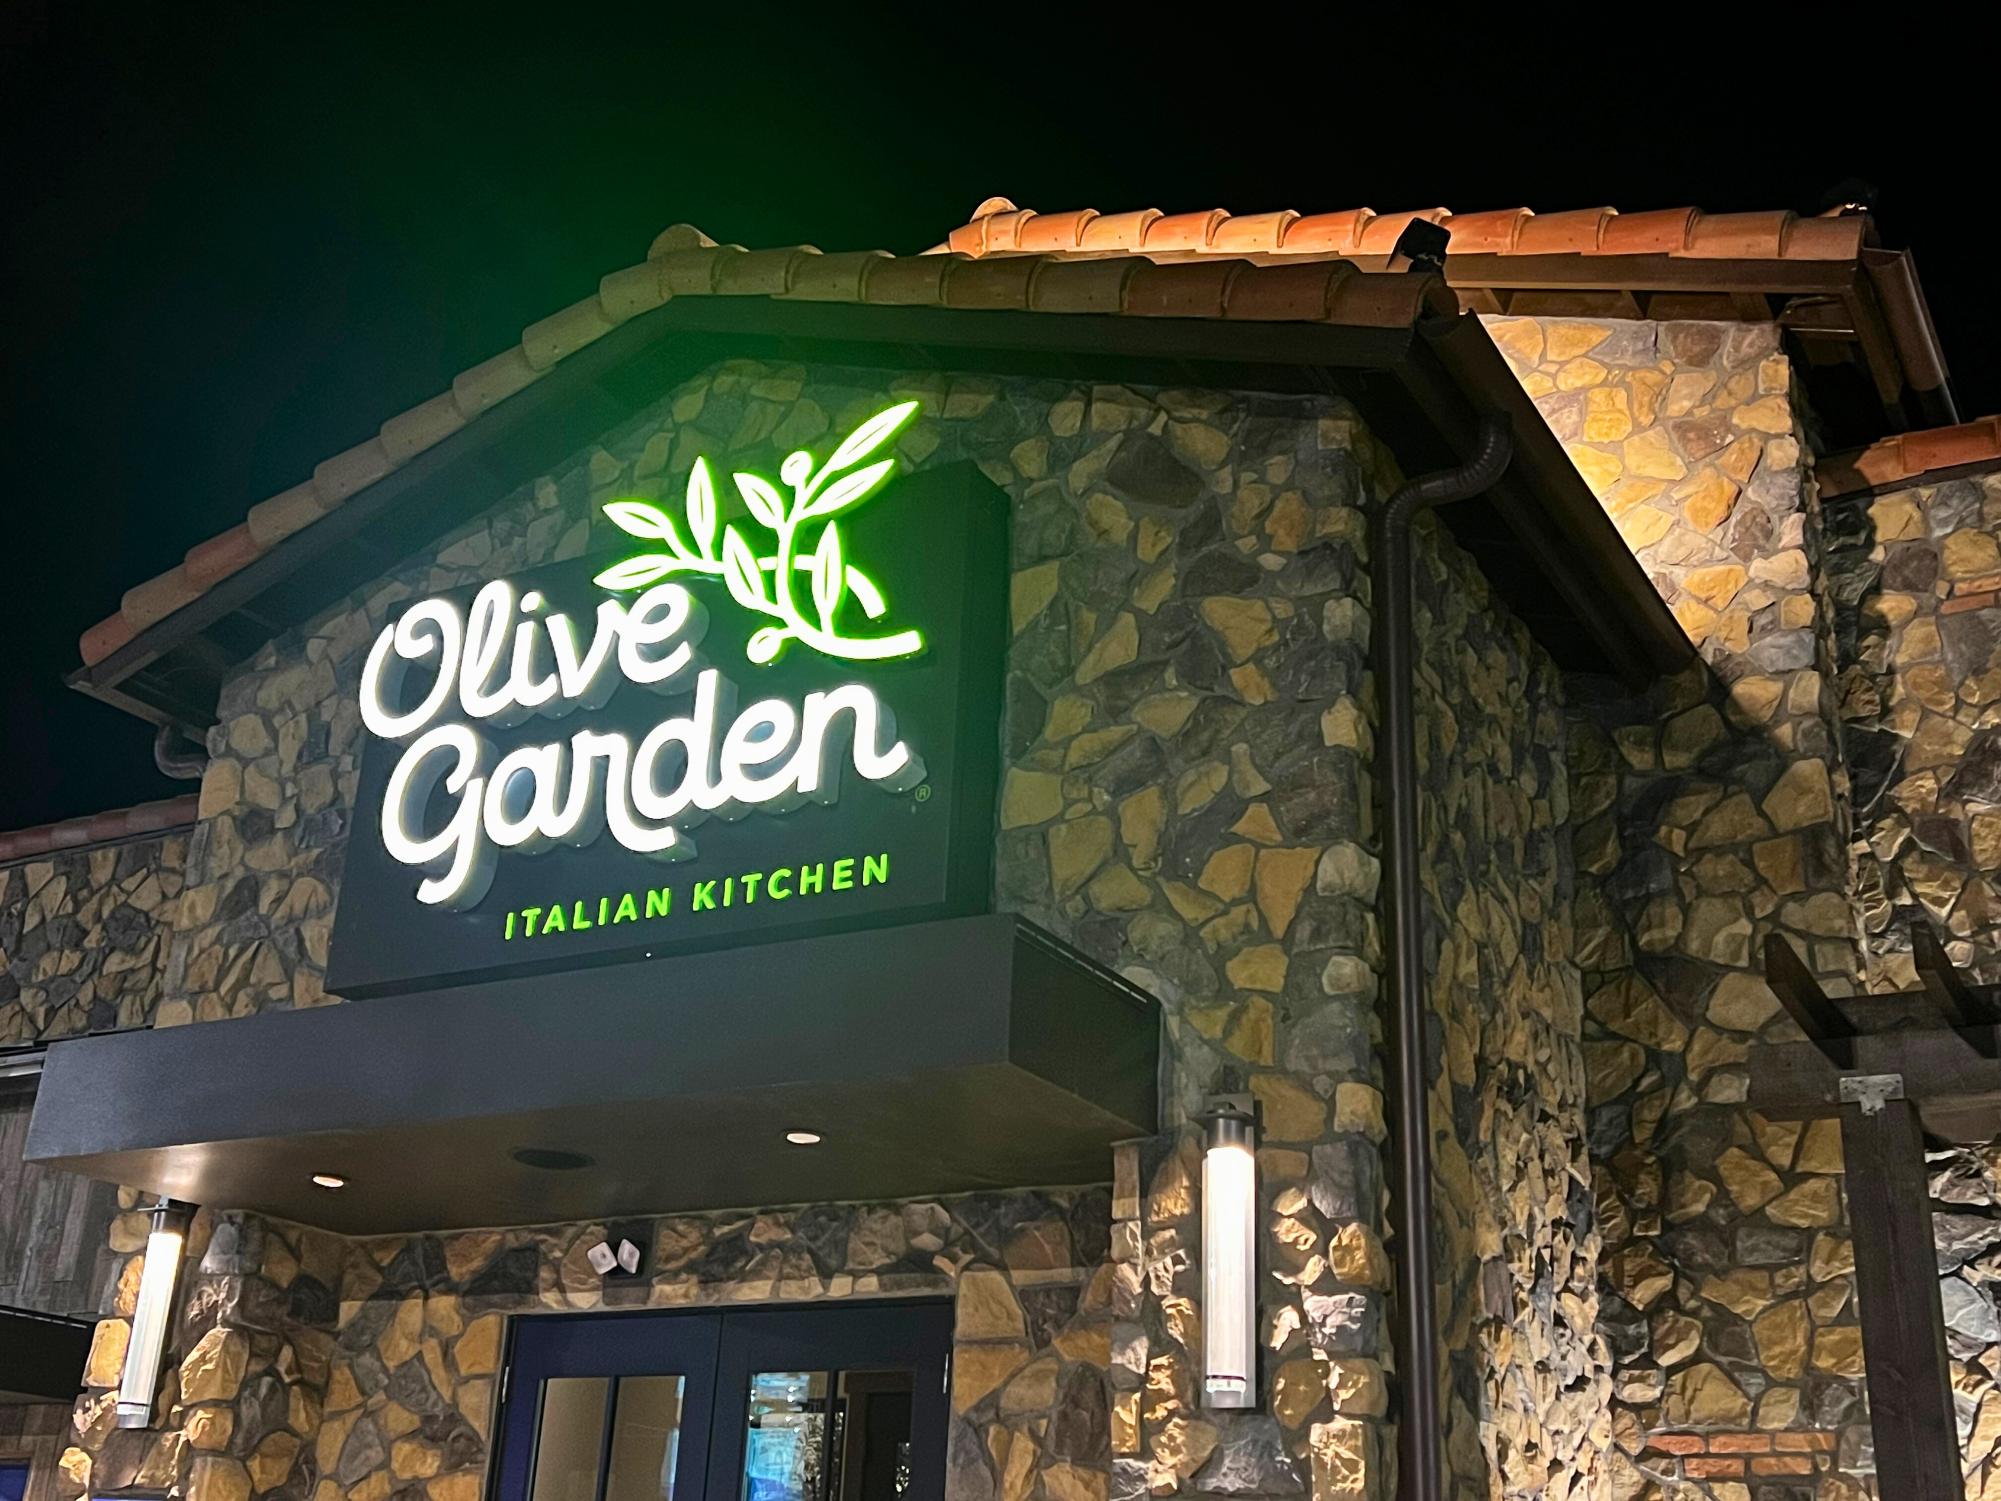 The newly built Olive Gardens sign shines in the night.